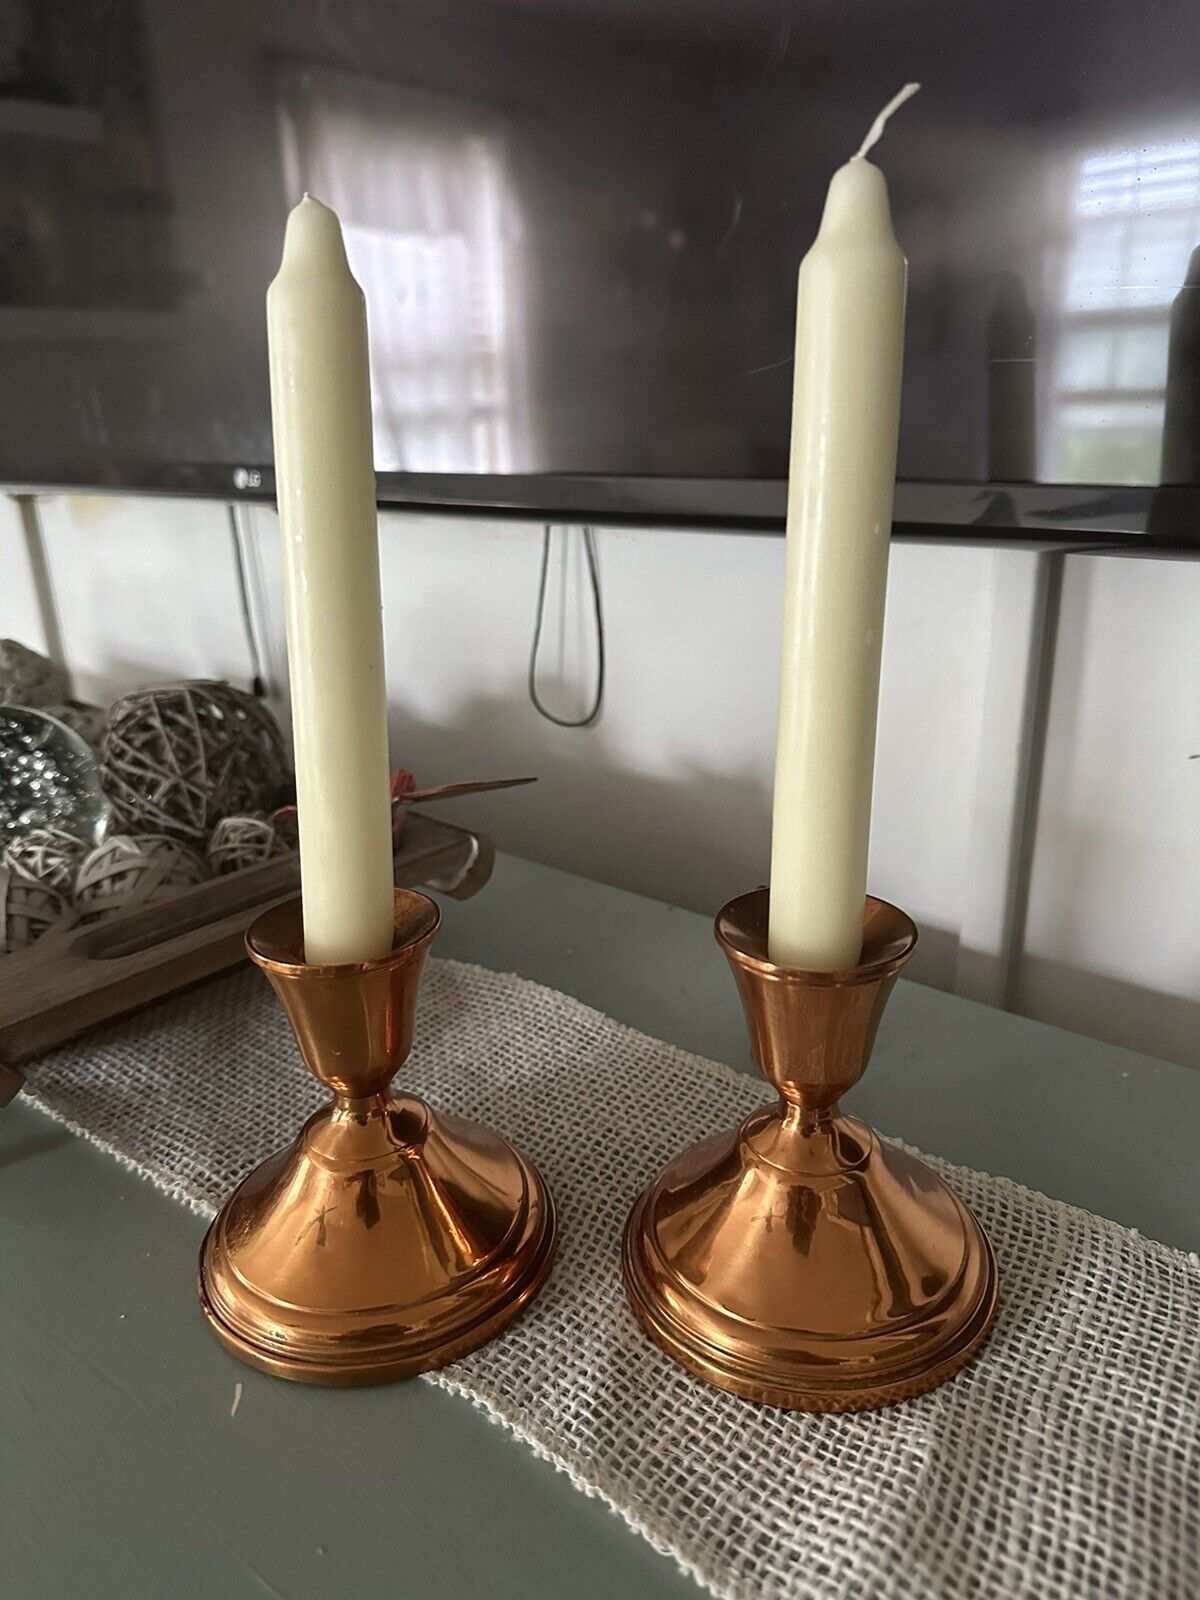 A Pair Of Copper Candle Holders